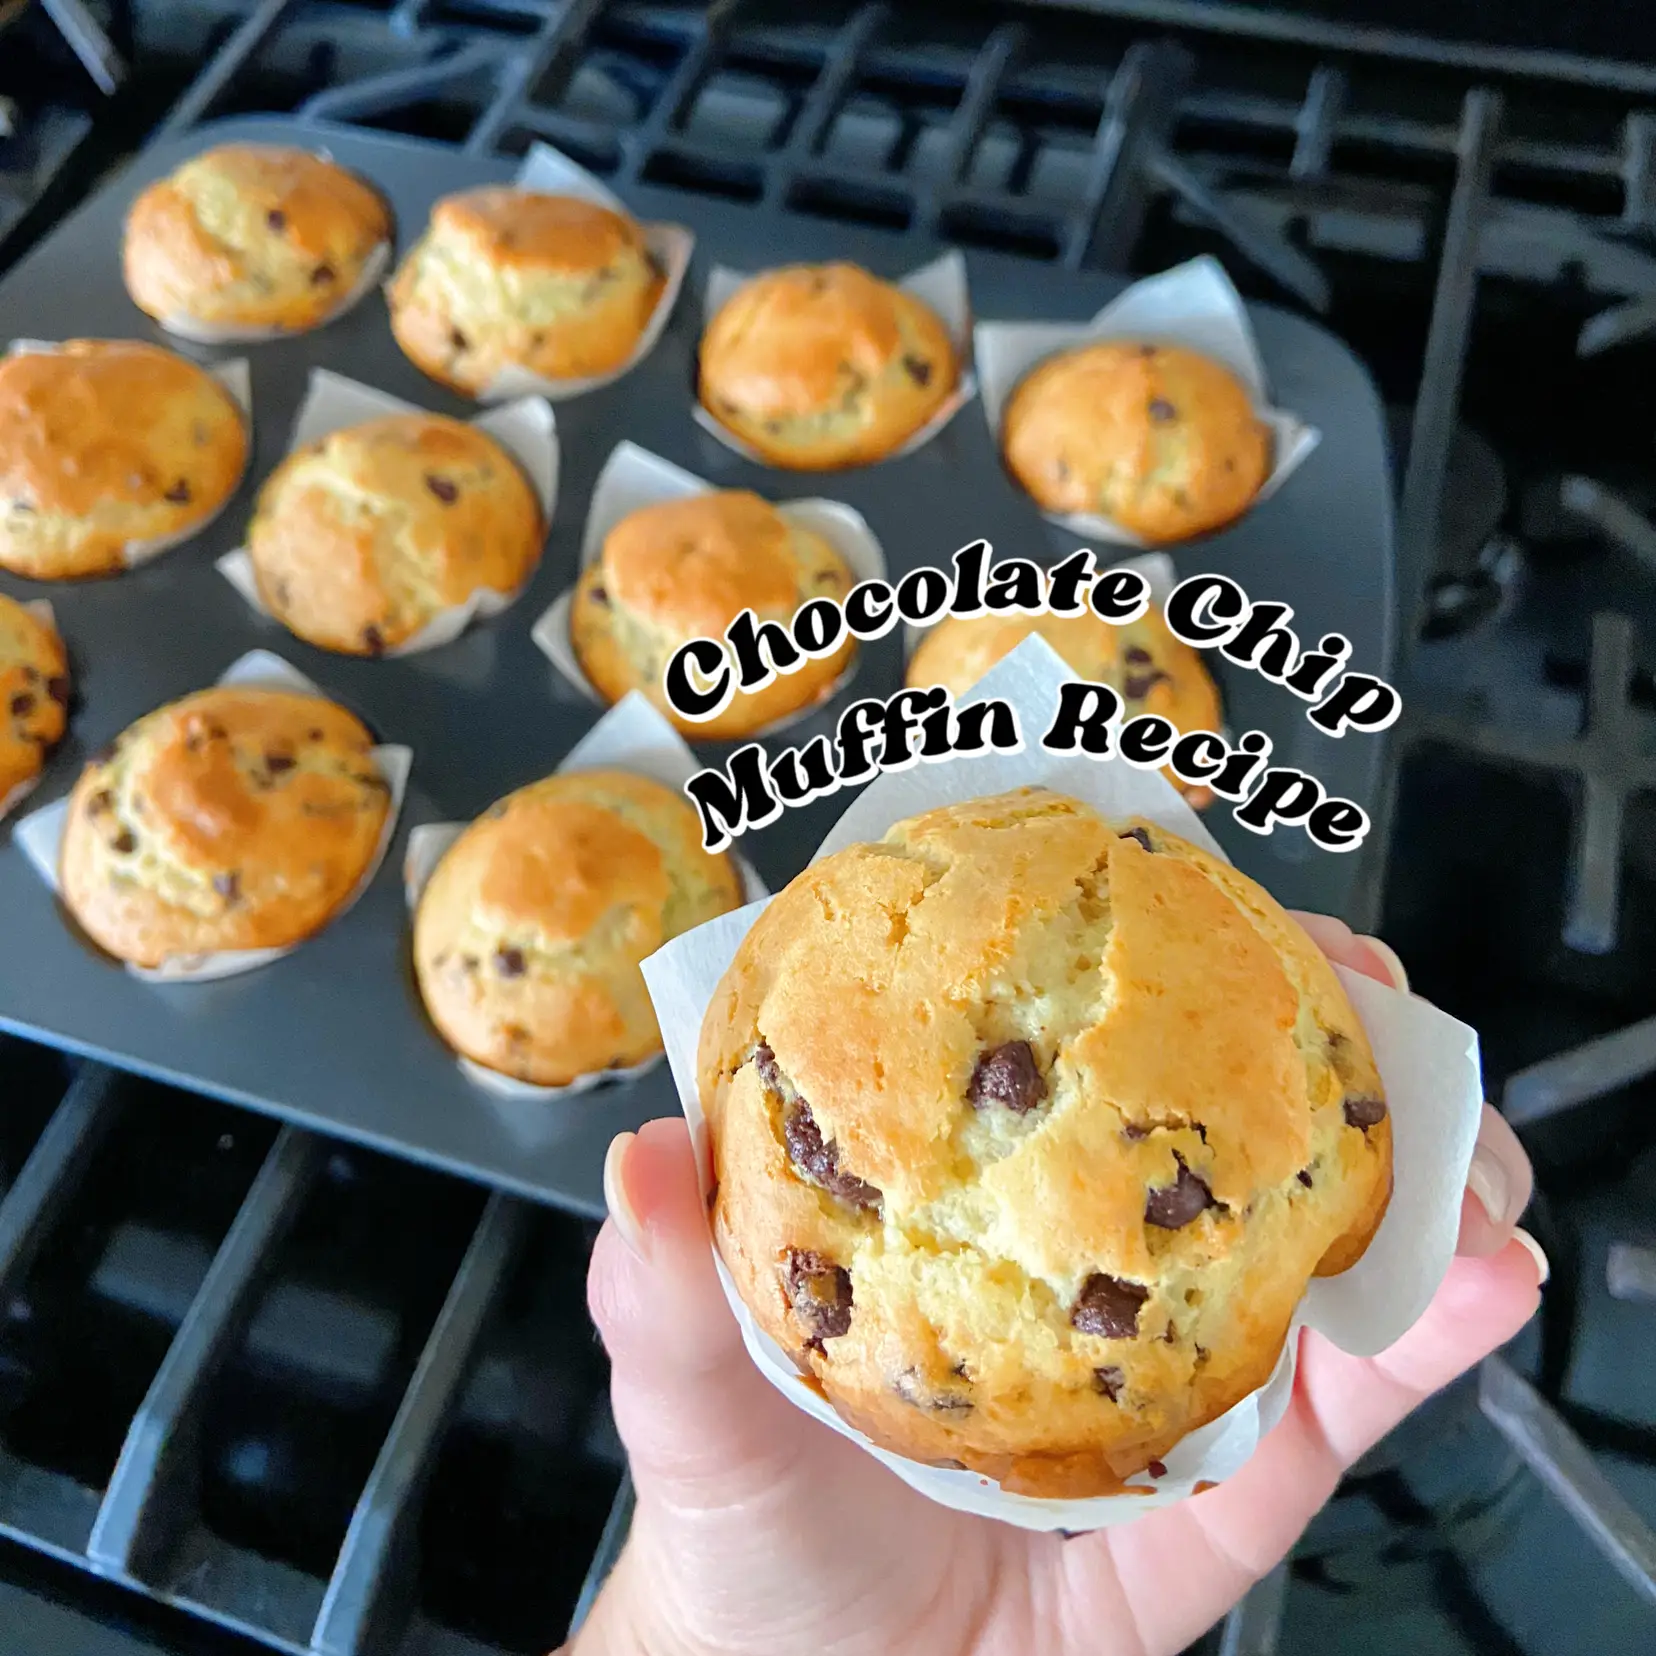 Thomas' Chocolate Chip Muffin Tops, 6 pc / 1.75 oz - Kroger